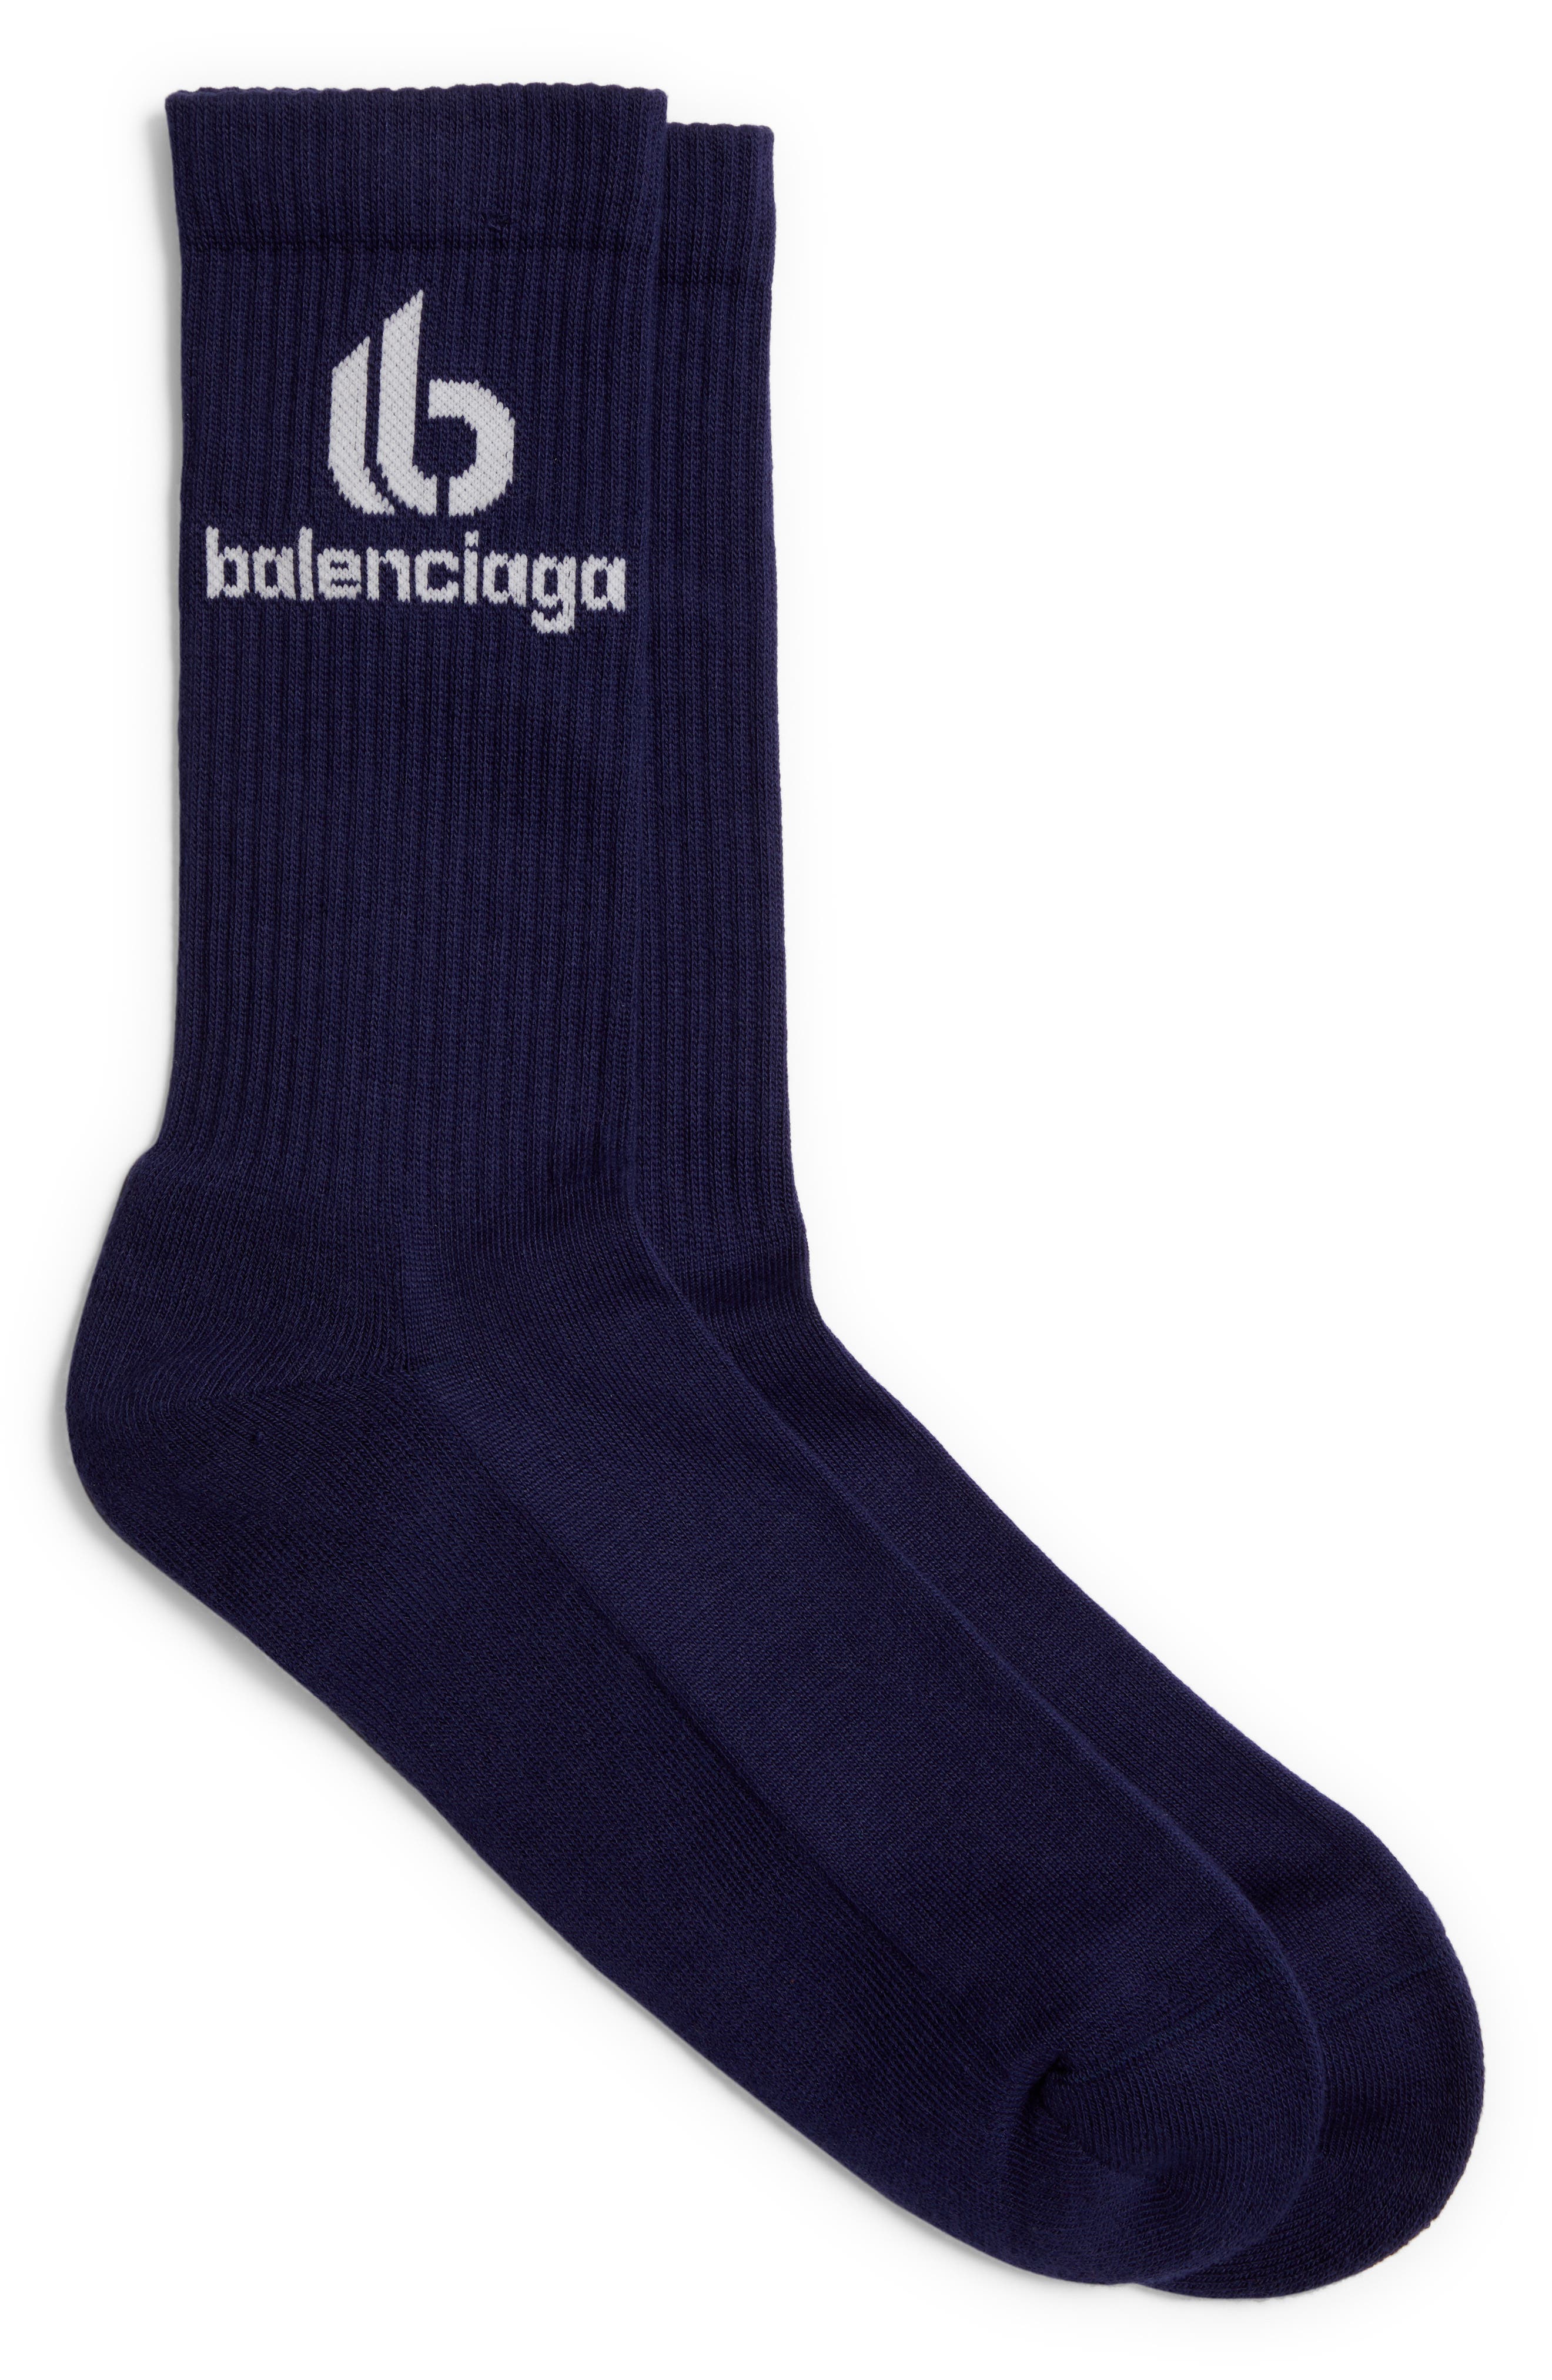 Balenciaga Double B Logo Crew Socks in Blue/White at Nordstrom, Size X-Large Us